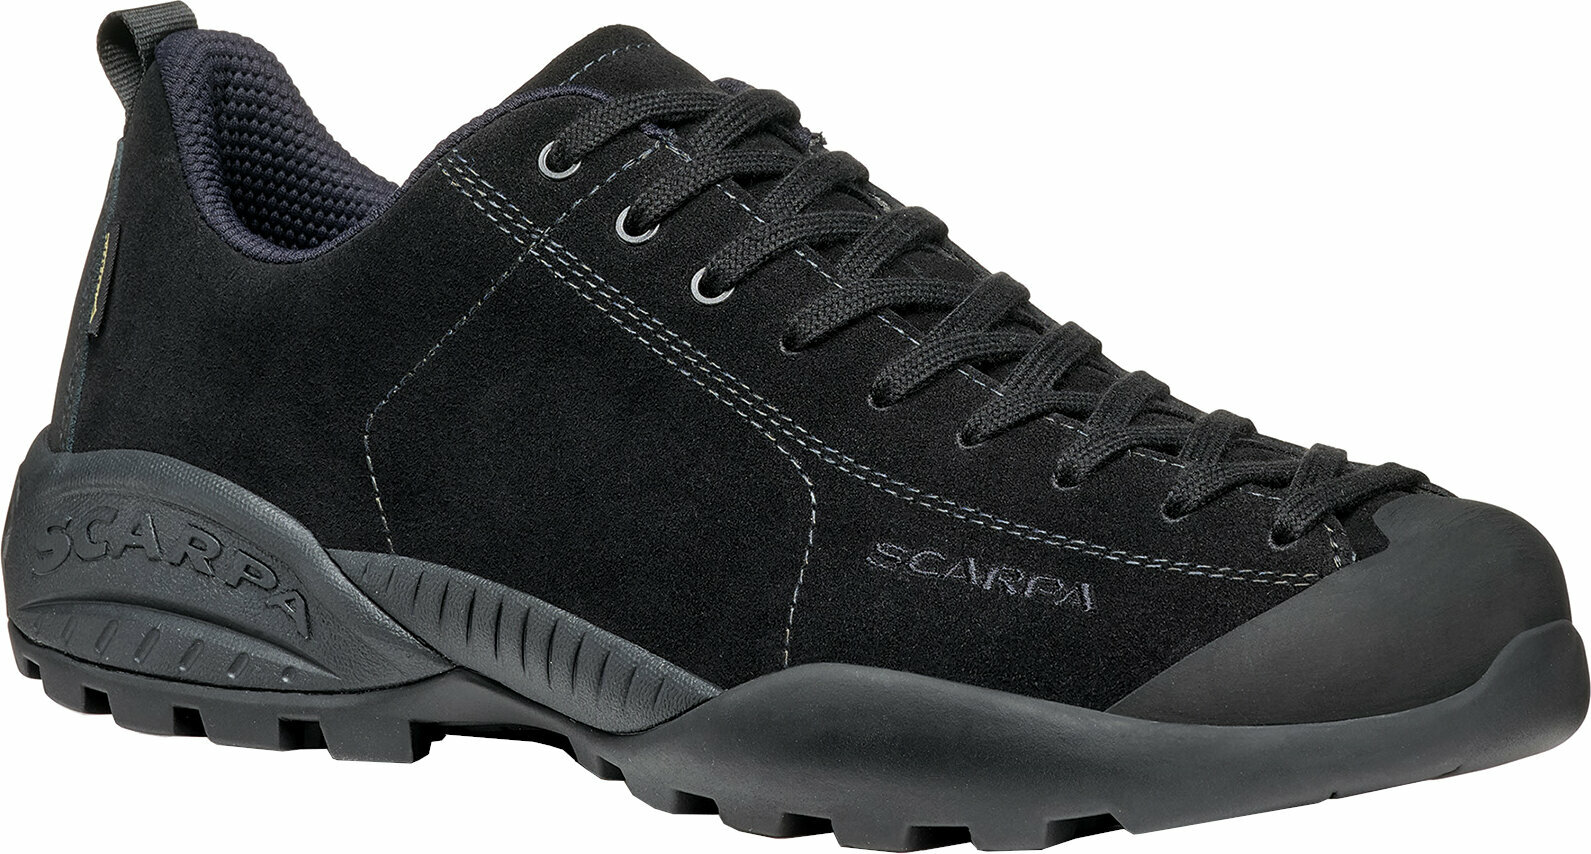 Chaussures outdoor hommes Scarpa Mojito GTX Black 42 Chaussures outdoor hommes